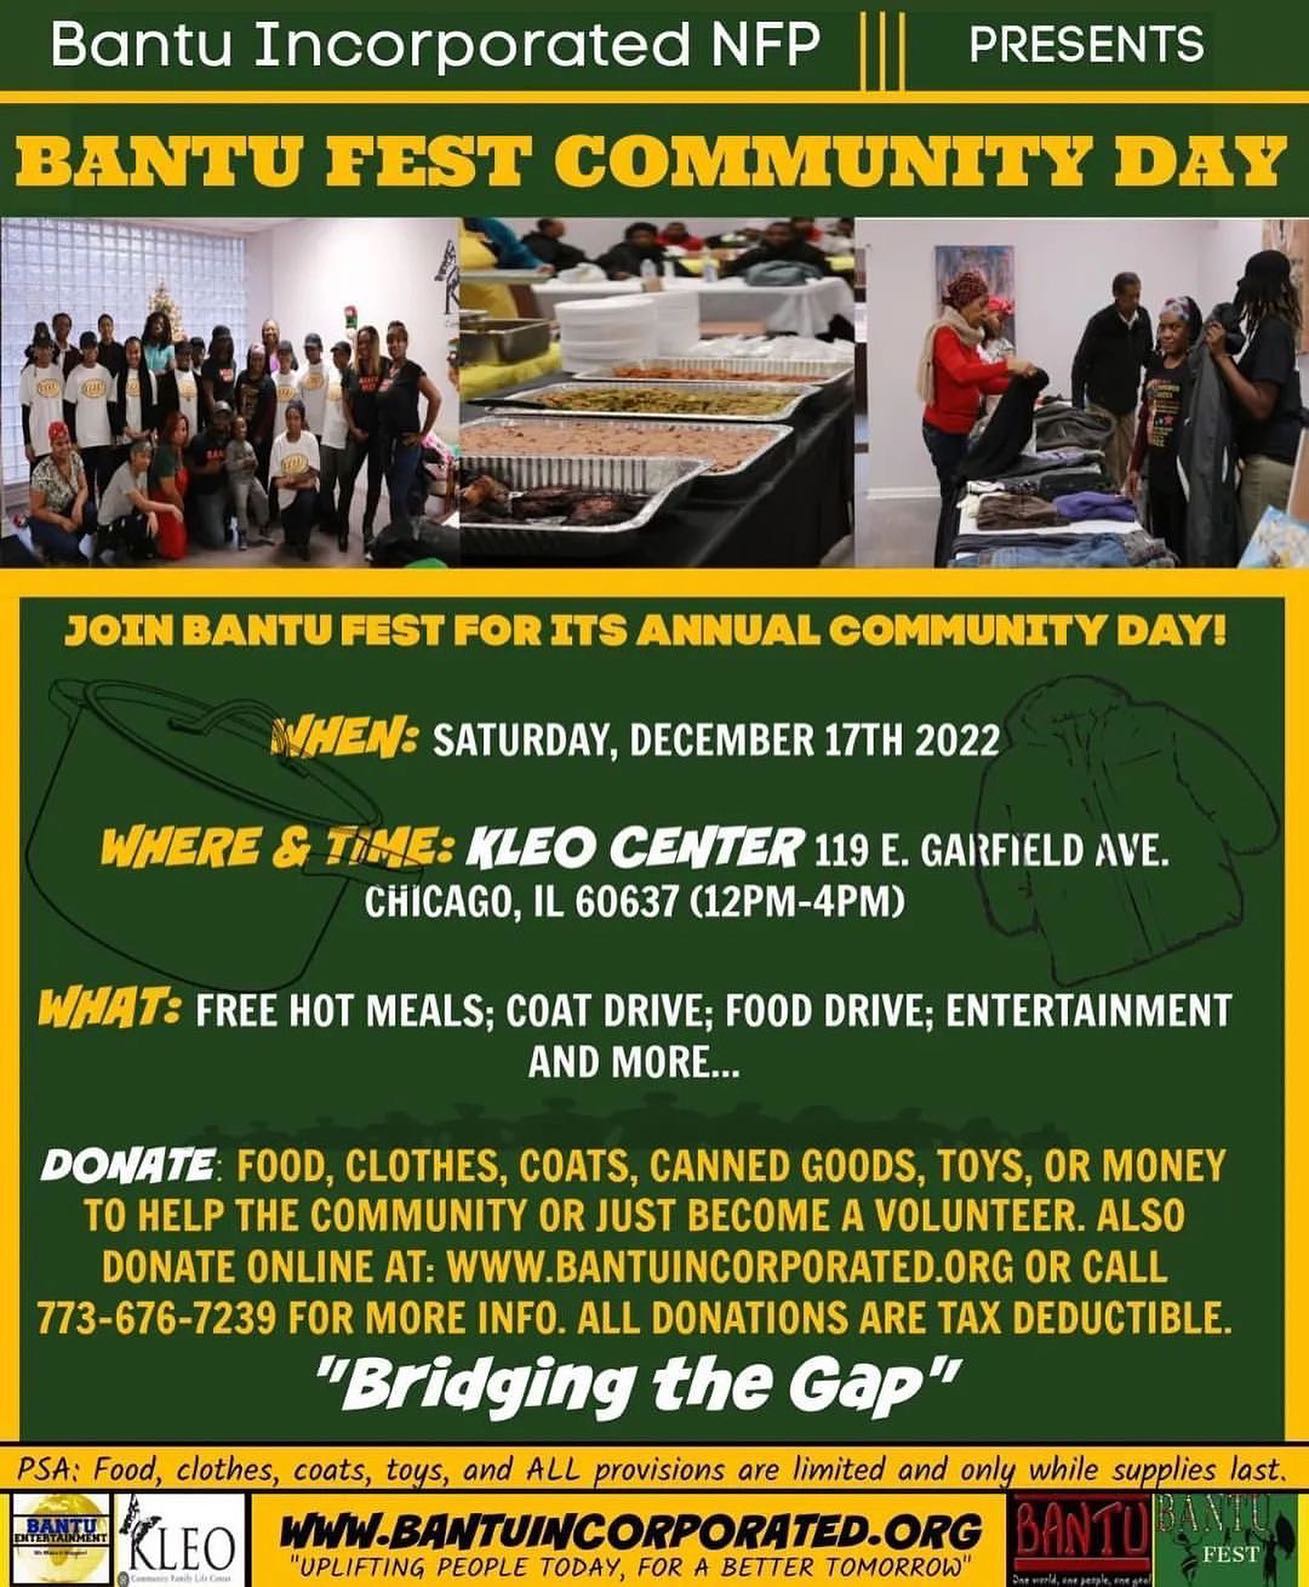 .

Join us today! 💚💛

Bantu Incorporated presents….
BANTU COMMUNITY FEST DAY
@bantufest 

TODAY Dec 17th 12-4PM 
KLEO Community Center
119 E. Garfield Blvd.

• FREE Hot meals 
• Coat drive 
• Food drive 
• Entertainment & more 

Link ins @bantufest bio 

Uplifting The People Today, for a Better Tomorrow!

Bantu Fest Community Day is today | Spread the word 🙌🏿 

See You at noon!

#bantufest #kleo #kleocommunitycenter #keeplovingeachother #bantufestchi #communityfest #coatdrive #entertainment #bridgingthegap #hotmeals #bantuincorporated